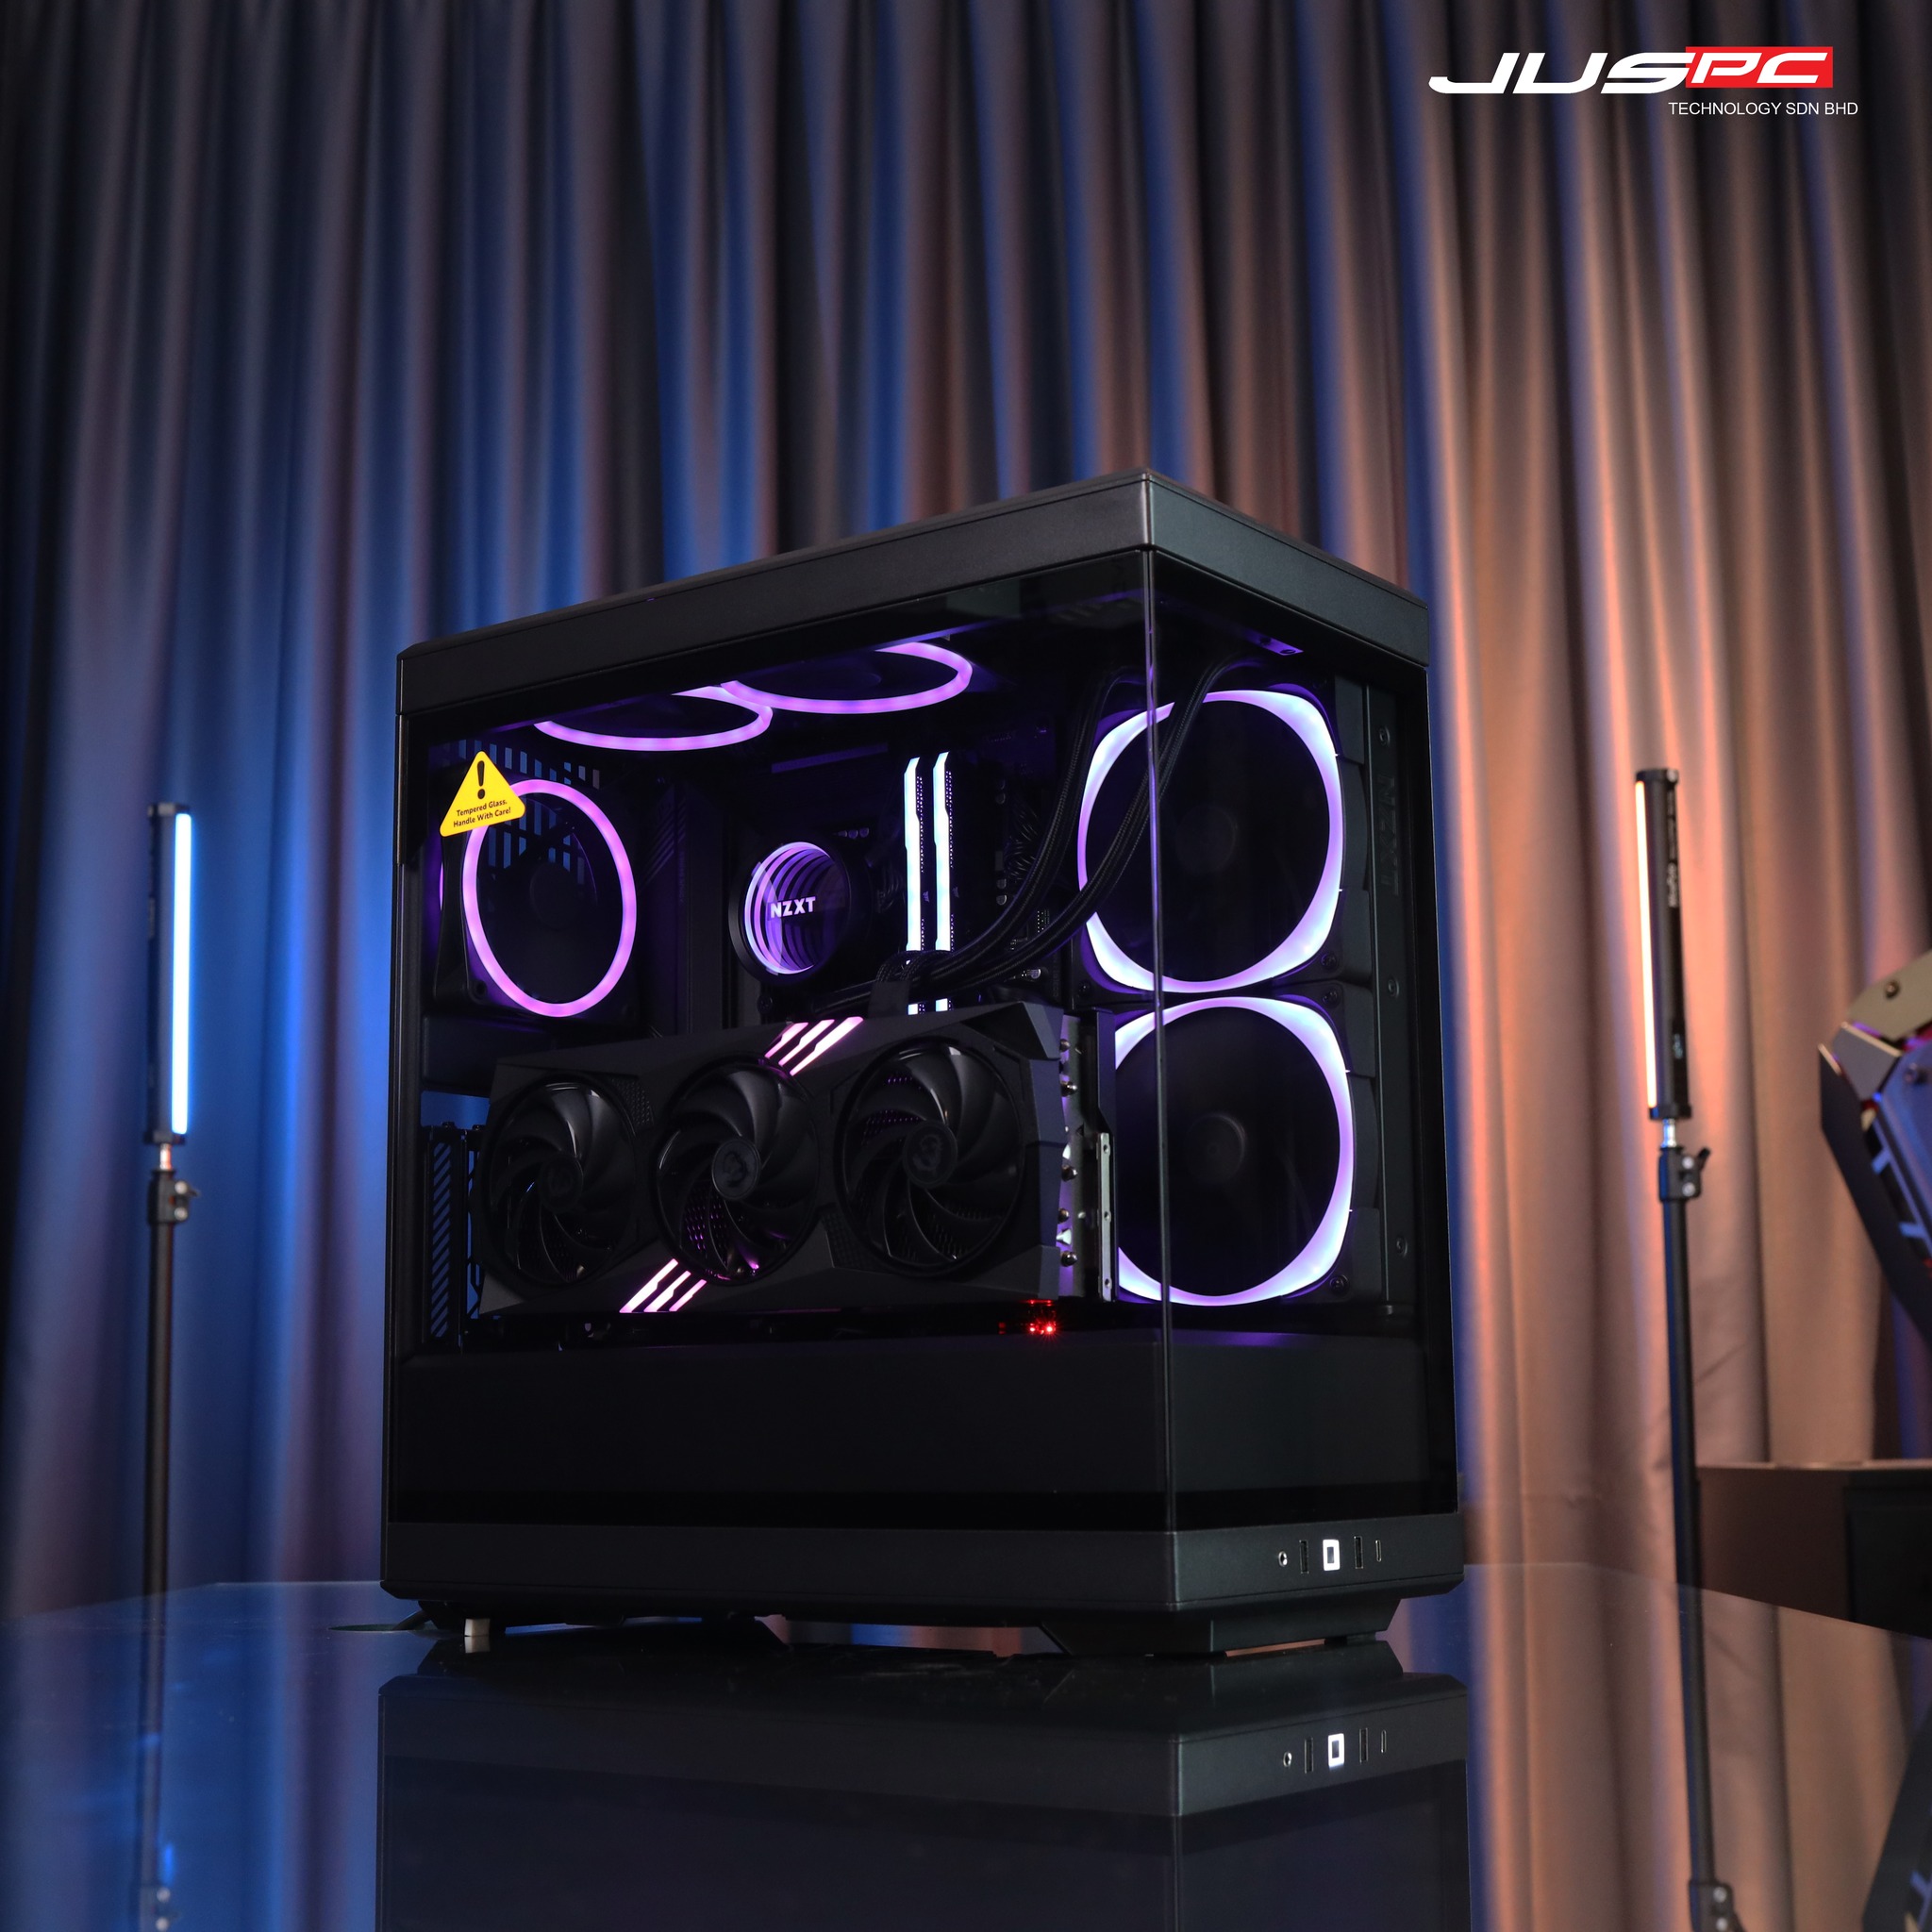 Raising The Bar For ATX Cases: The All-new Y40 Sets New Standards